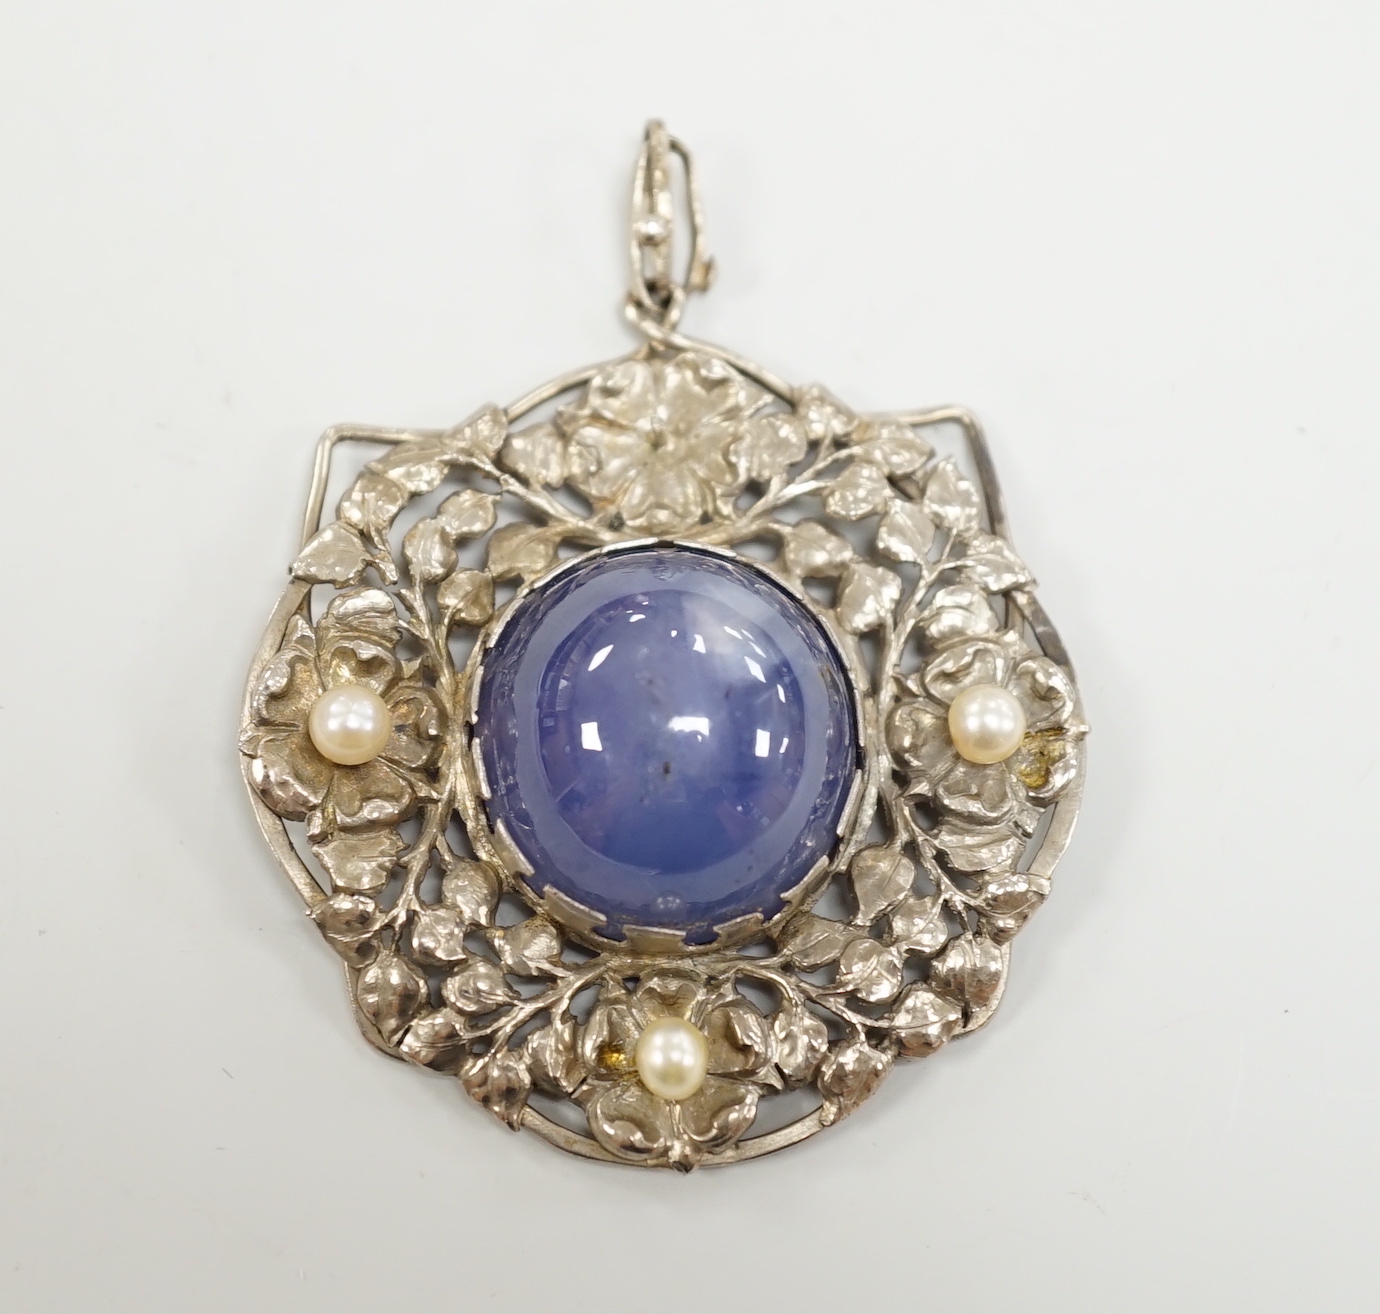 An early 20th century continental pierced white metal, cabochon star sapphire and cultured pearl set circular pendant, diameter 46mm.